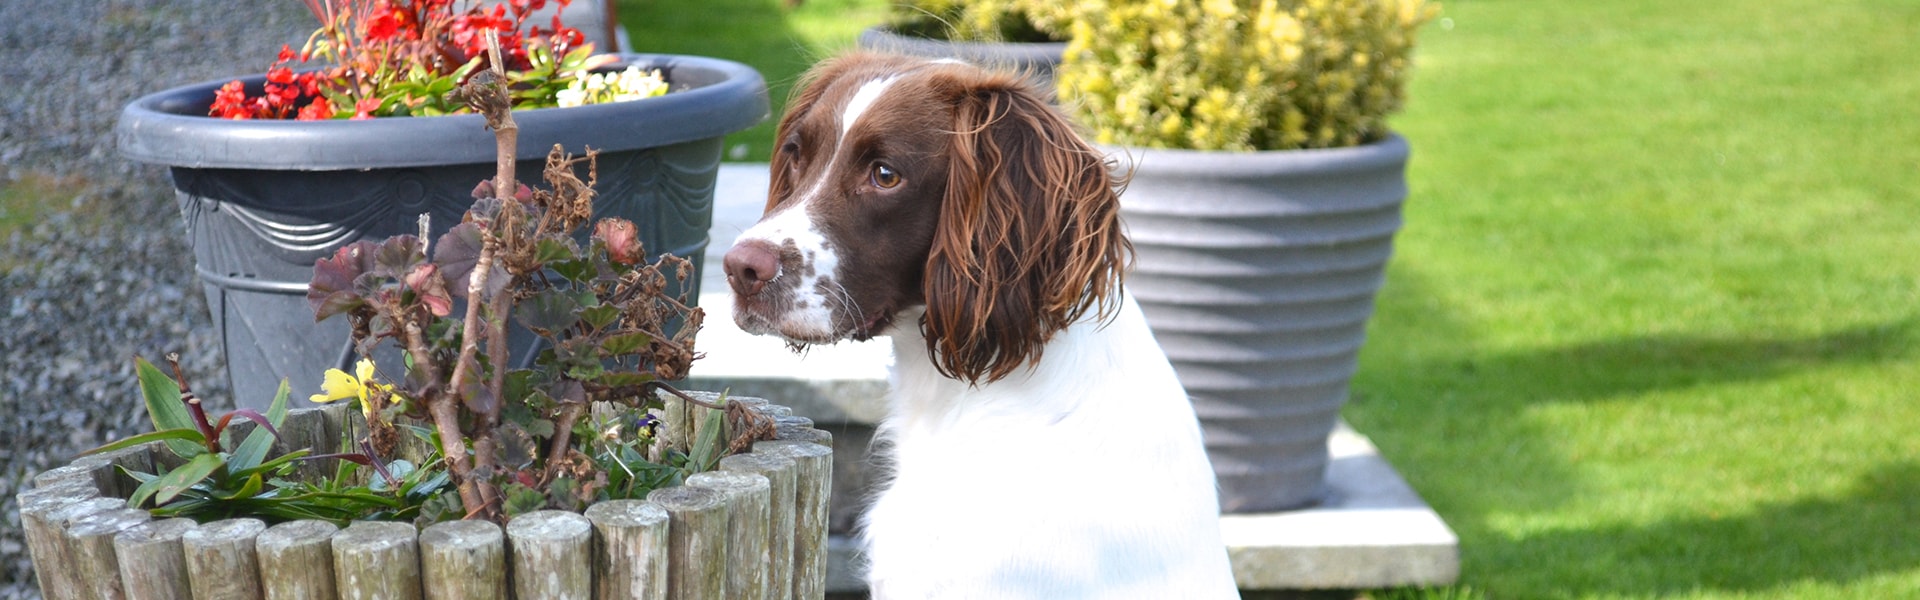 Pebbles(Field Spaniel) by a flower crate.